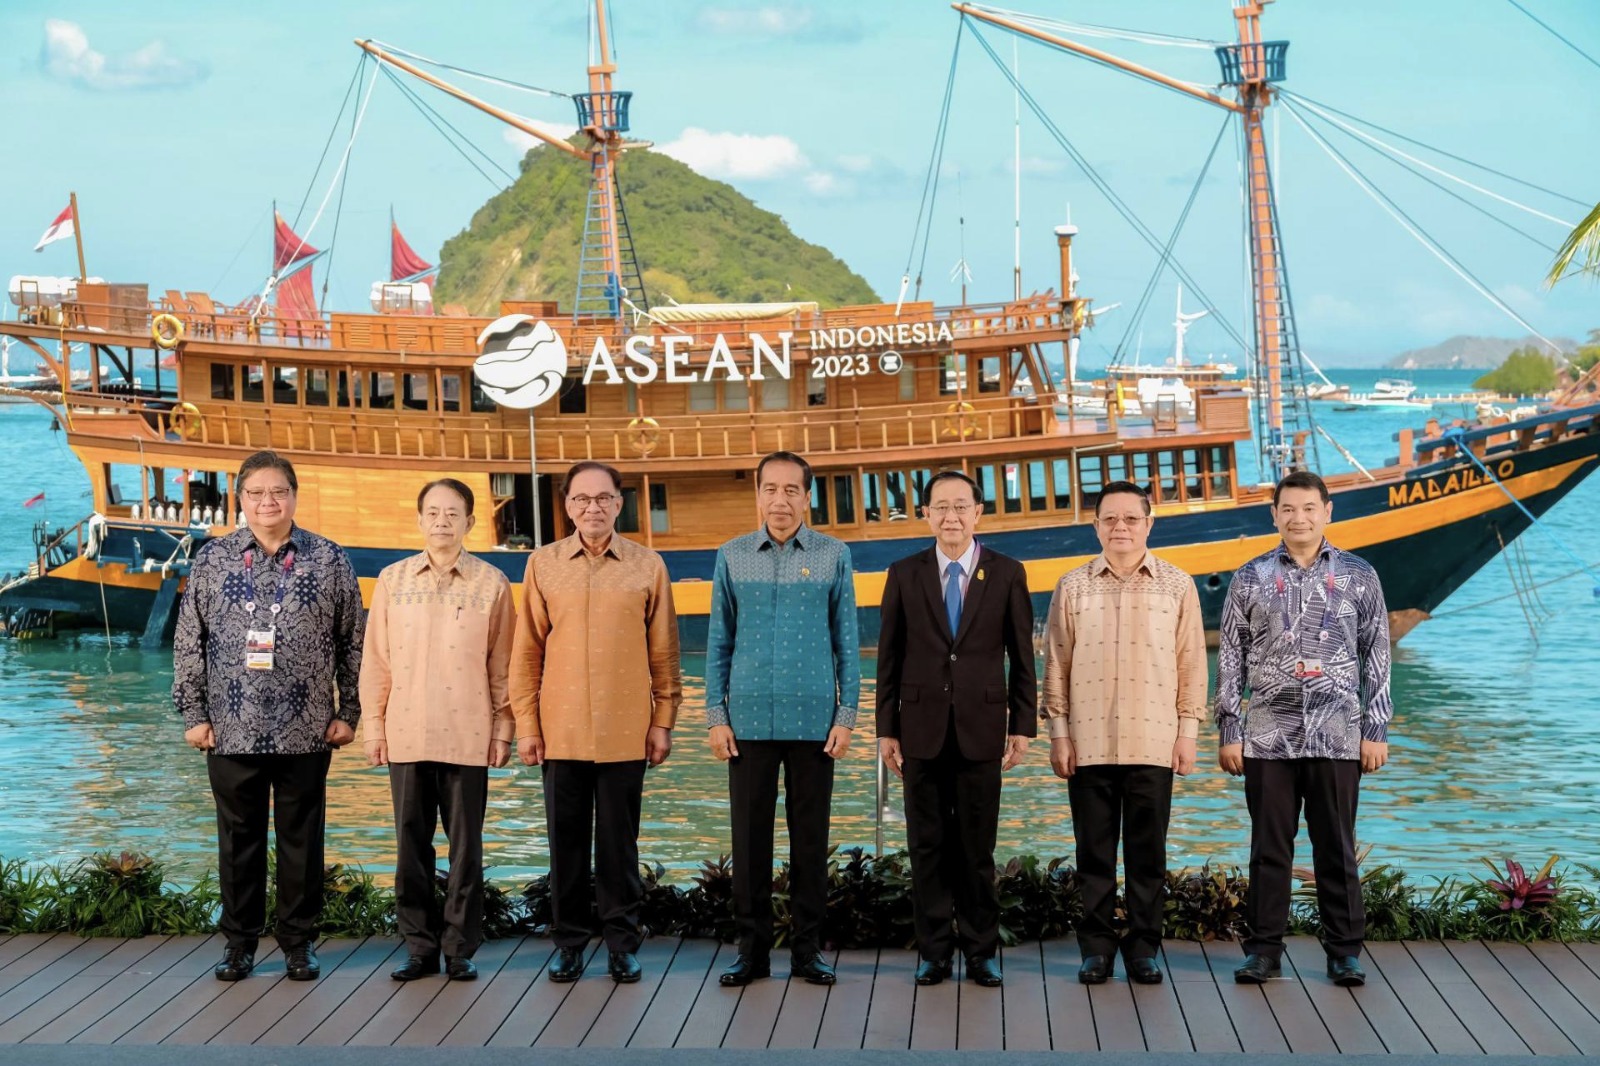 Press Release ASEAN Summit 2023: Indonesian President to Announce Declaration of the 42nd ASEAN Summit 2023